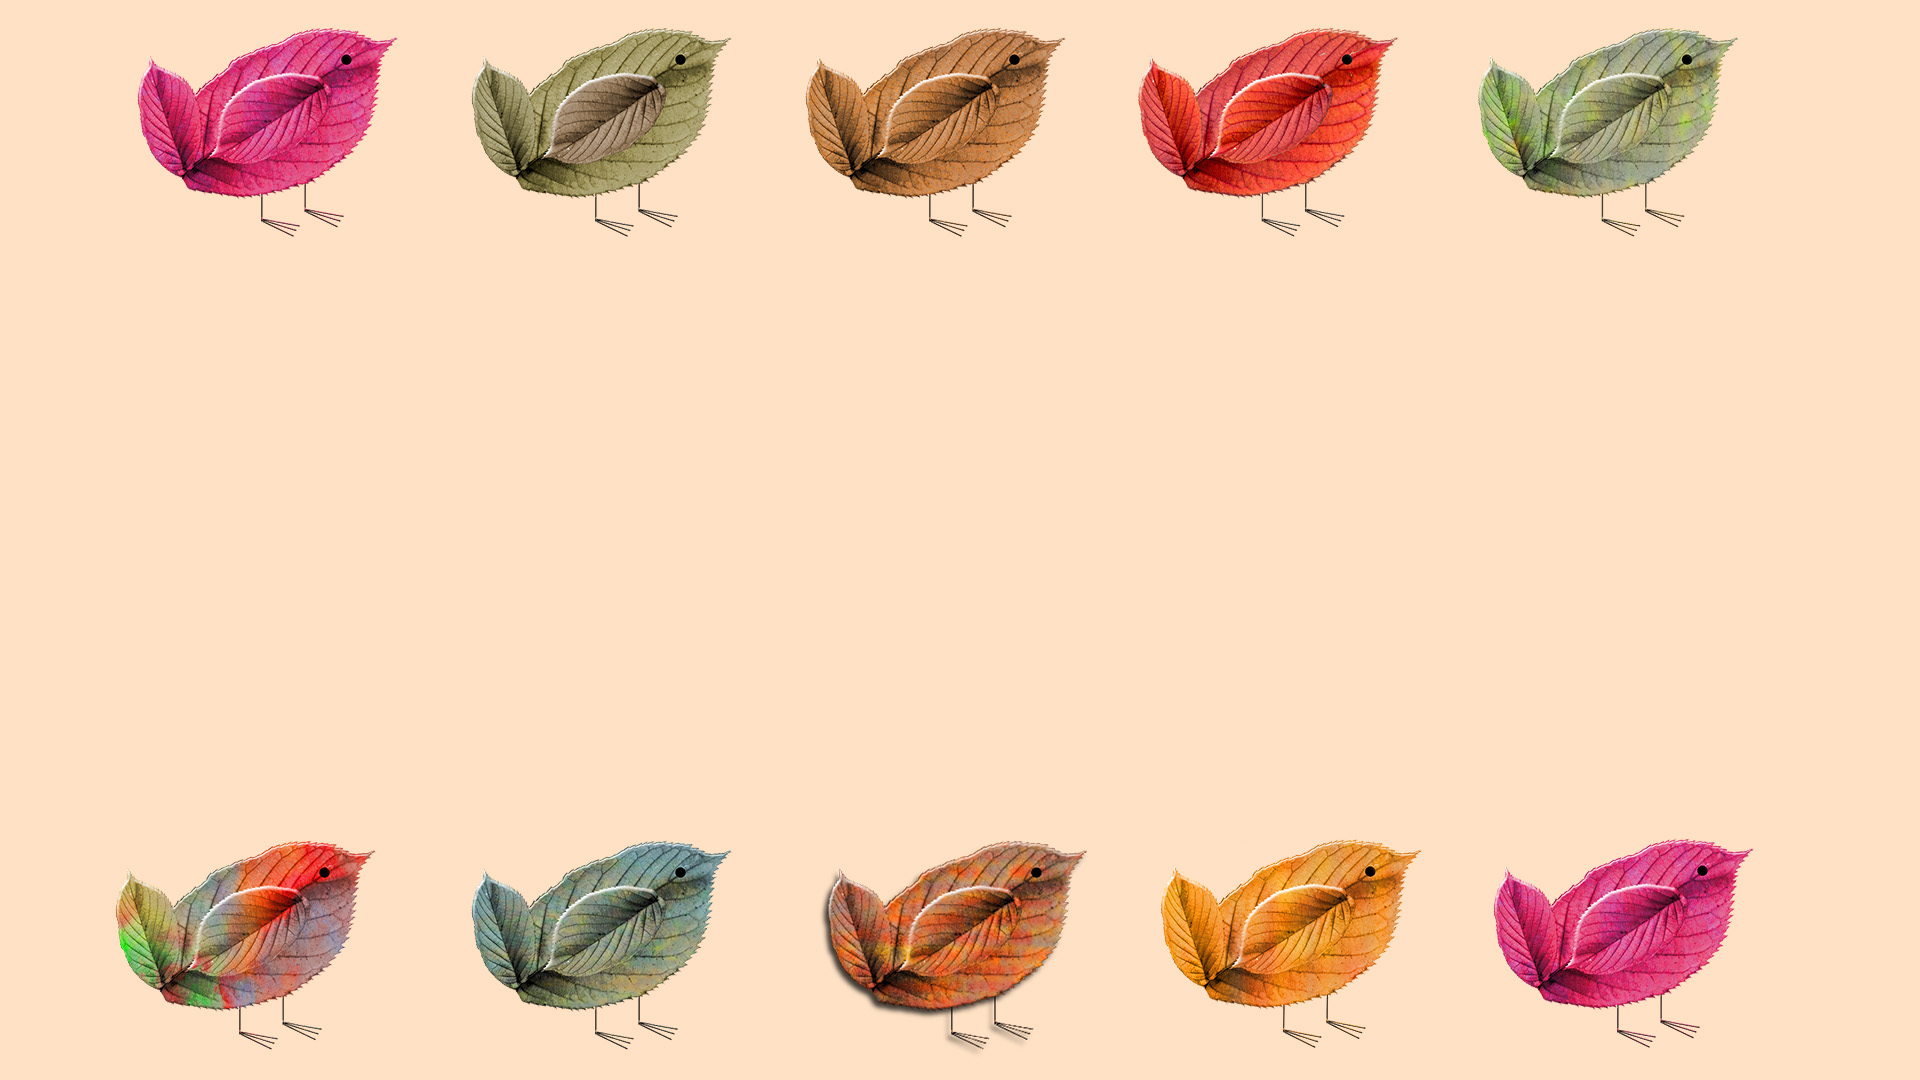 Tan, peach background. Five birds made out of three tree leaves cross the top edge. From left to right the birds are pink, green, brown, red, green. Five more leaf birds along the bottom edge. From left to right the birds are rainbow, blue, brown, orange, and pink.